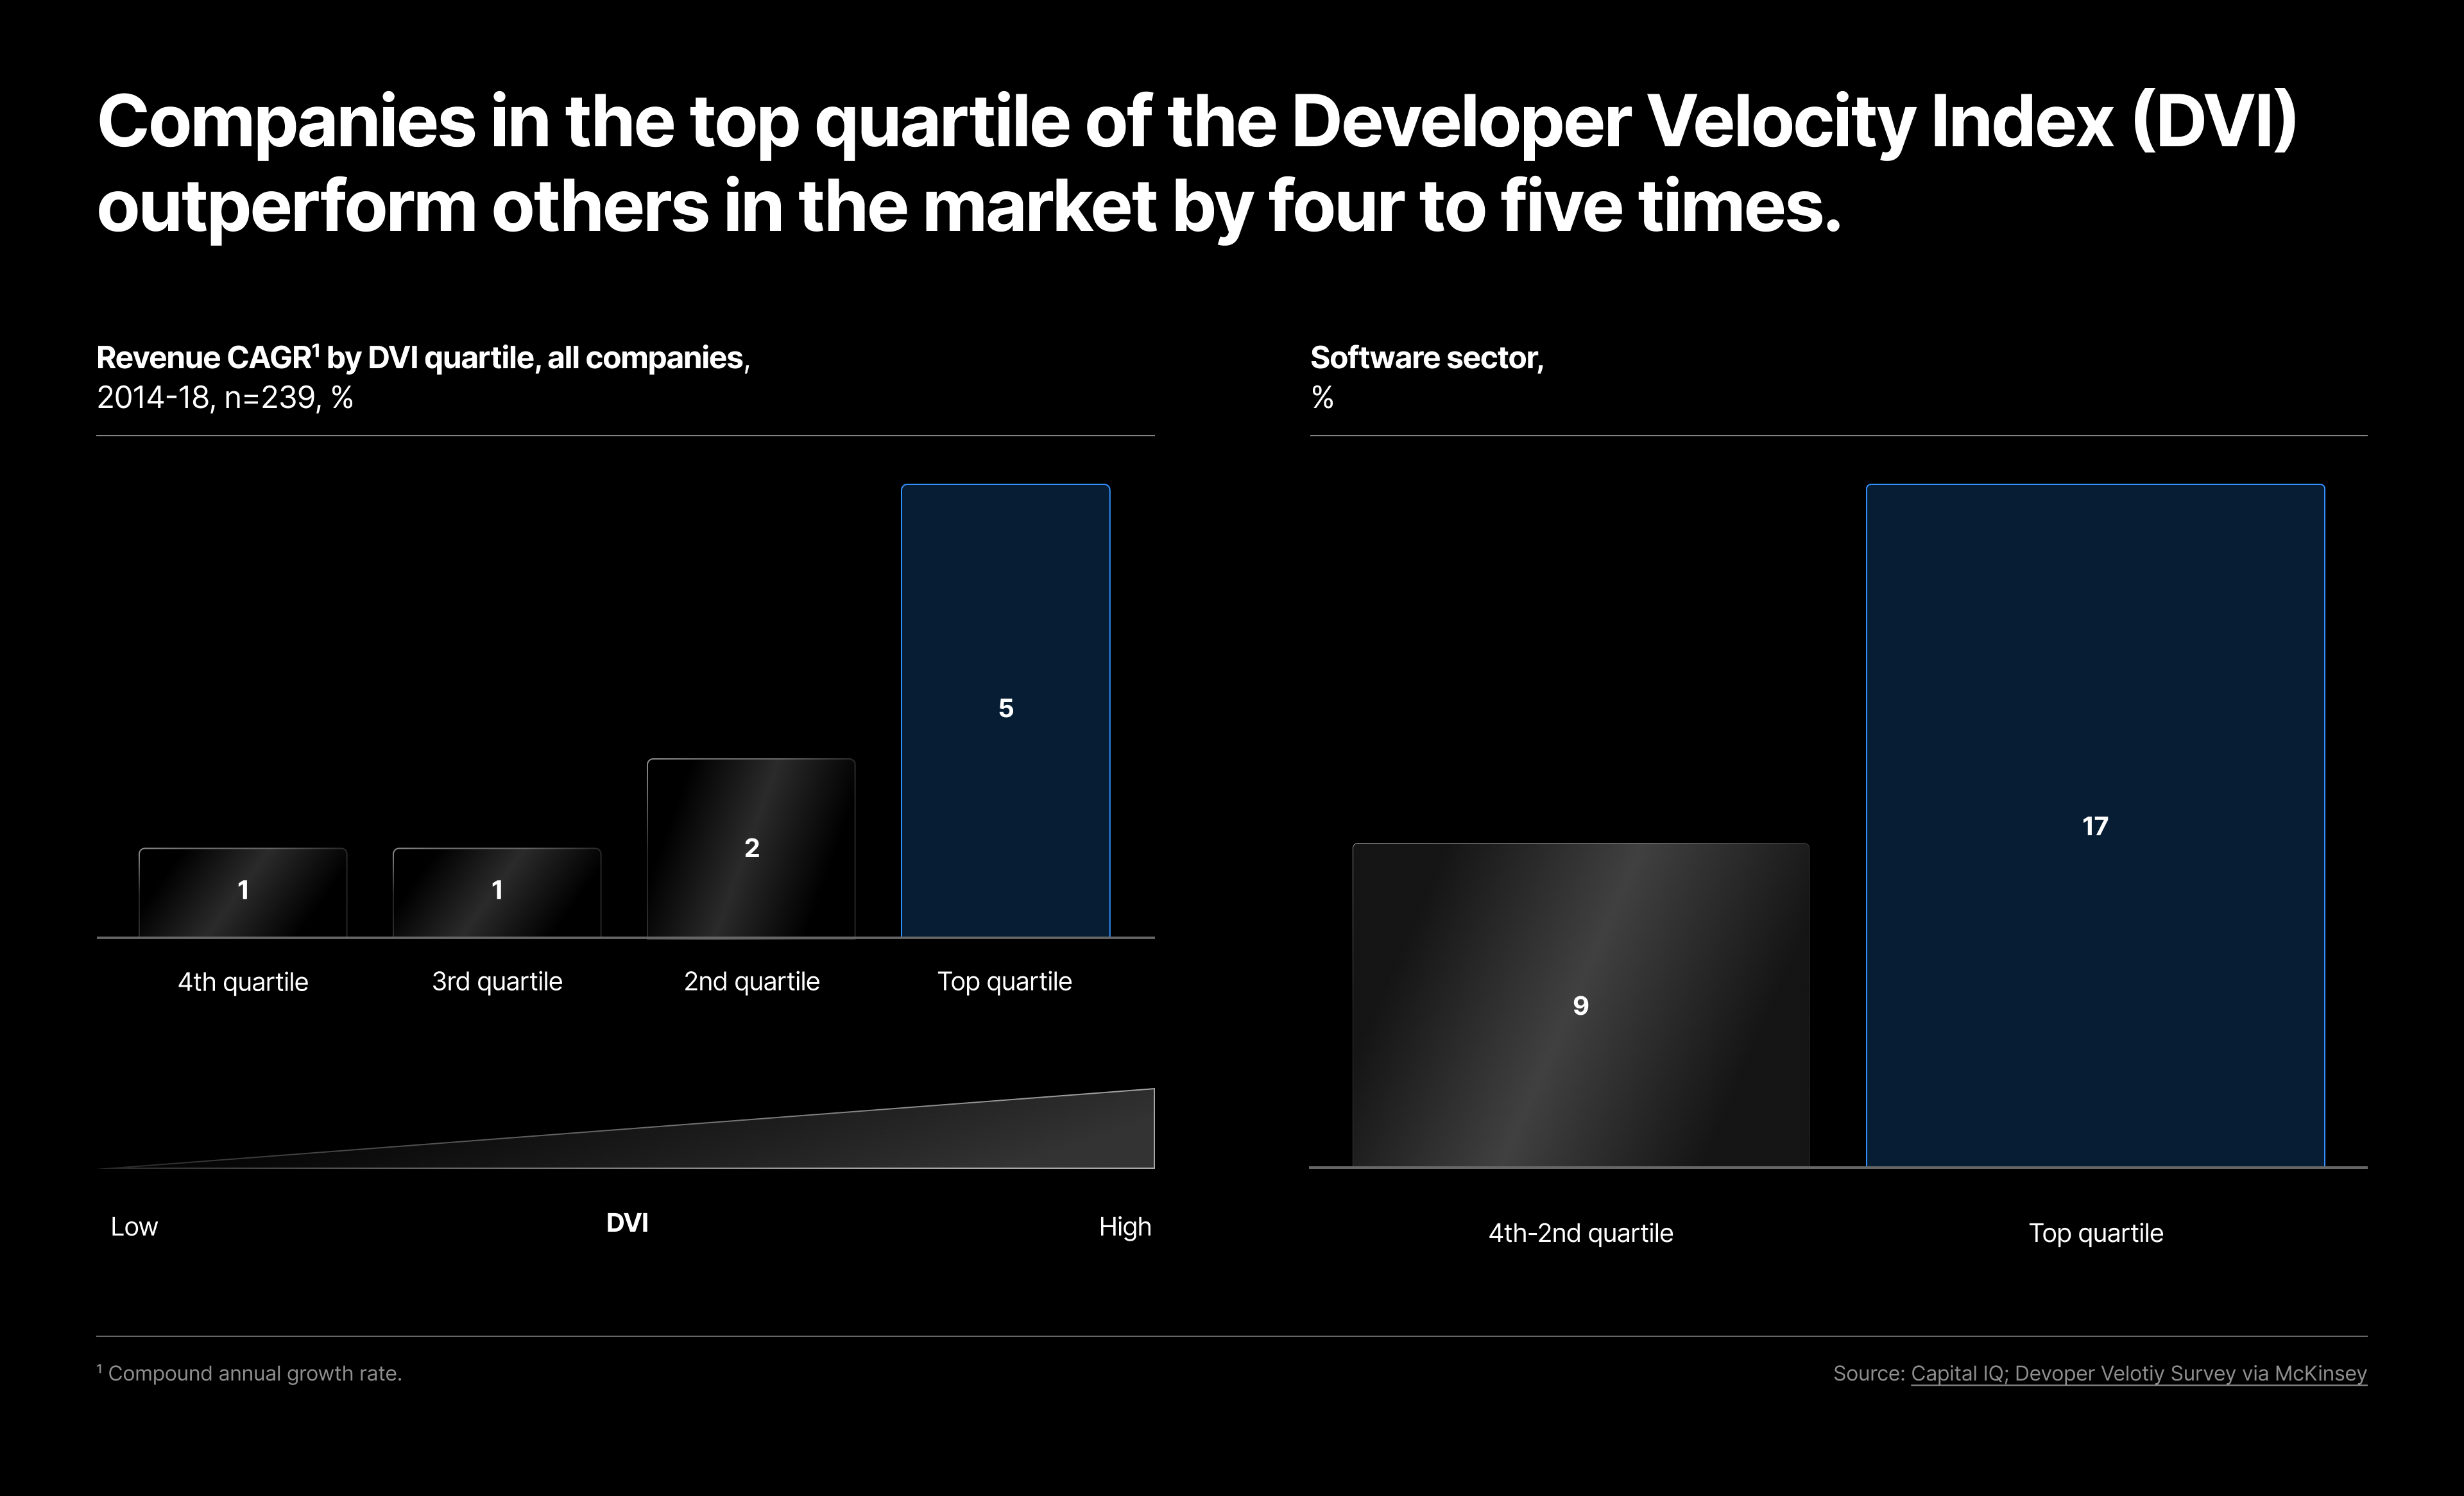 McKinsey’s Developer Velocity Index (DVI) quantifies the impact of developer velocity on an organization's performance. Their research found that companies with high DVI scores were more likely to achieve better business outcomes, including faster revenue growth, higher levels of innovation, and improved customer satisfaction.